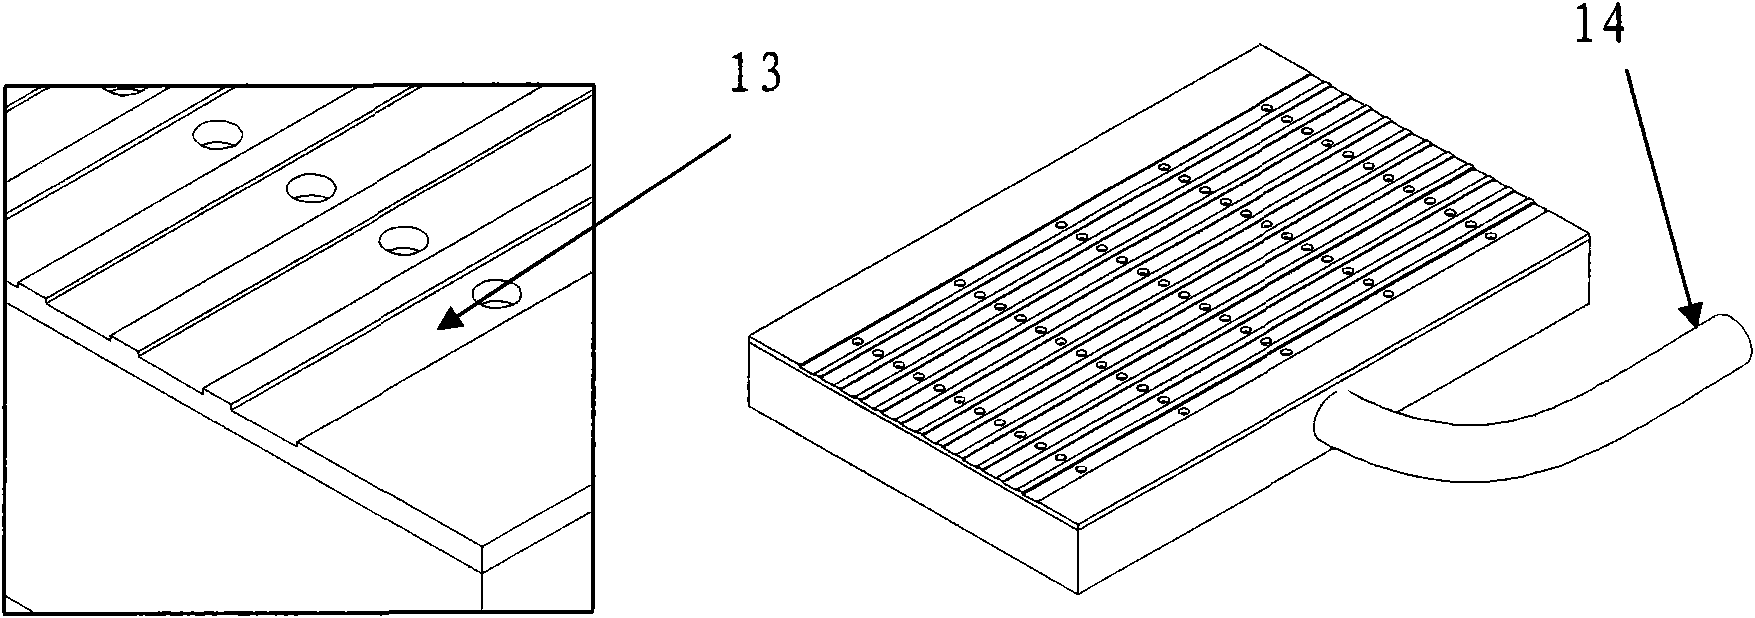 Single-sided circuit board made by gluing flat wires arranged side by side with thermosetting adhesive film